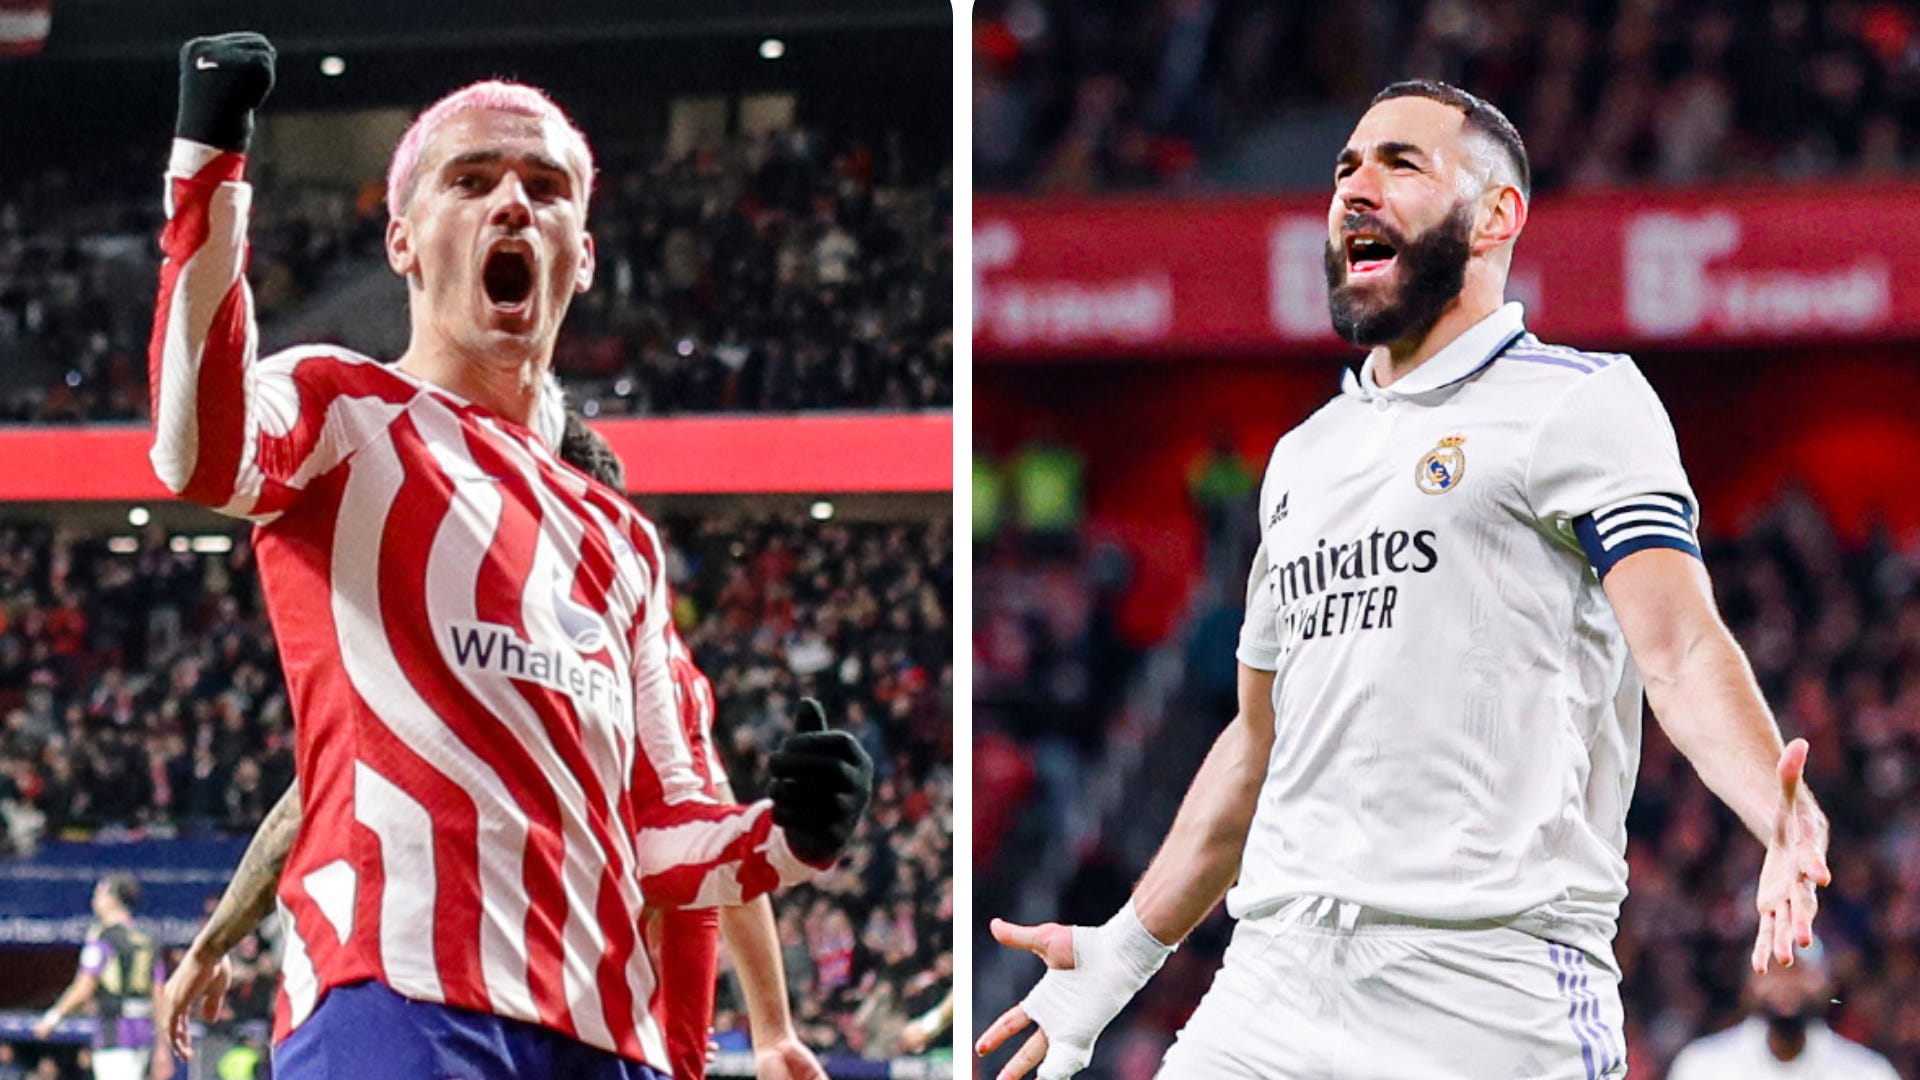 Real Madrid vs Atletico Madrid Live stream, TV channel, kick-off time and where to watch Goal US